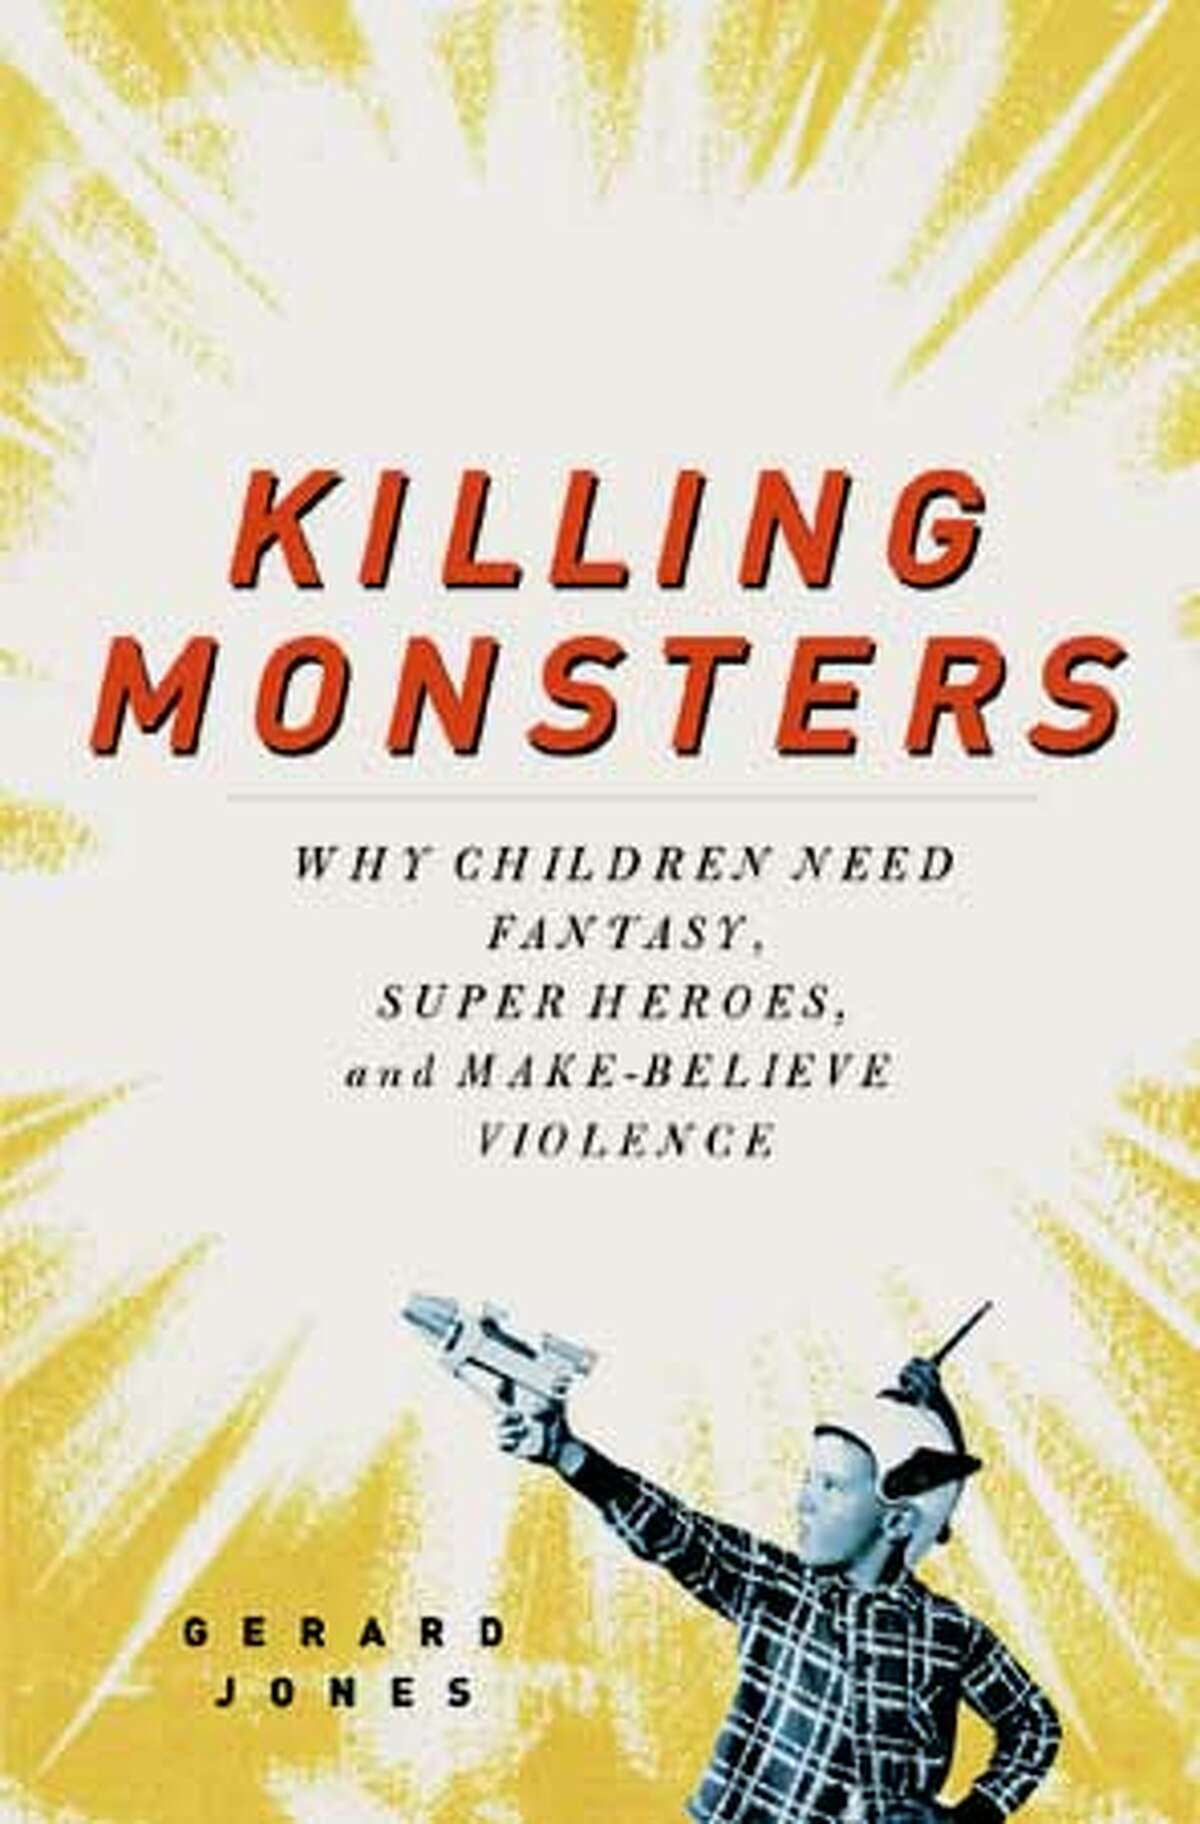 Jones who was the author of Killing Monsters: Why Children Need Fantasy, Super Heroes, and Make-Believe Violence. In the book, Jones maintains the position that violence and sexuality in comic books is good for kids, and demonizing it can do great harm to their emotional development.